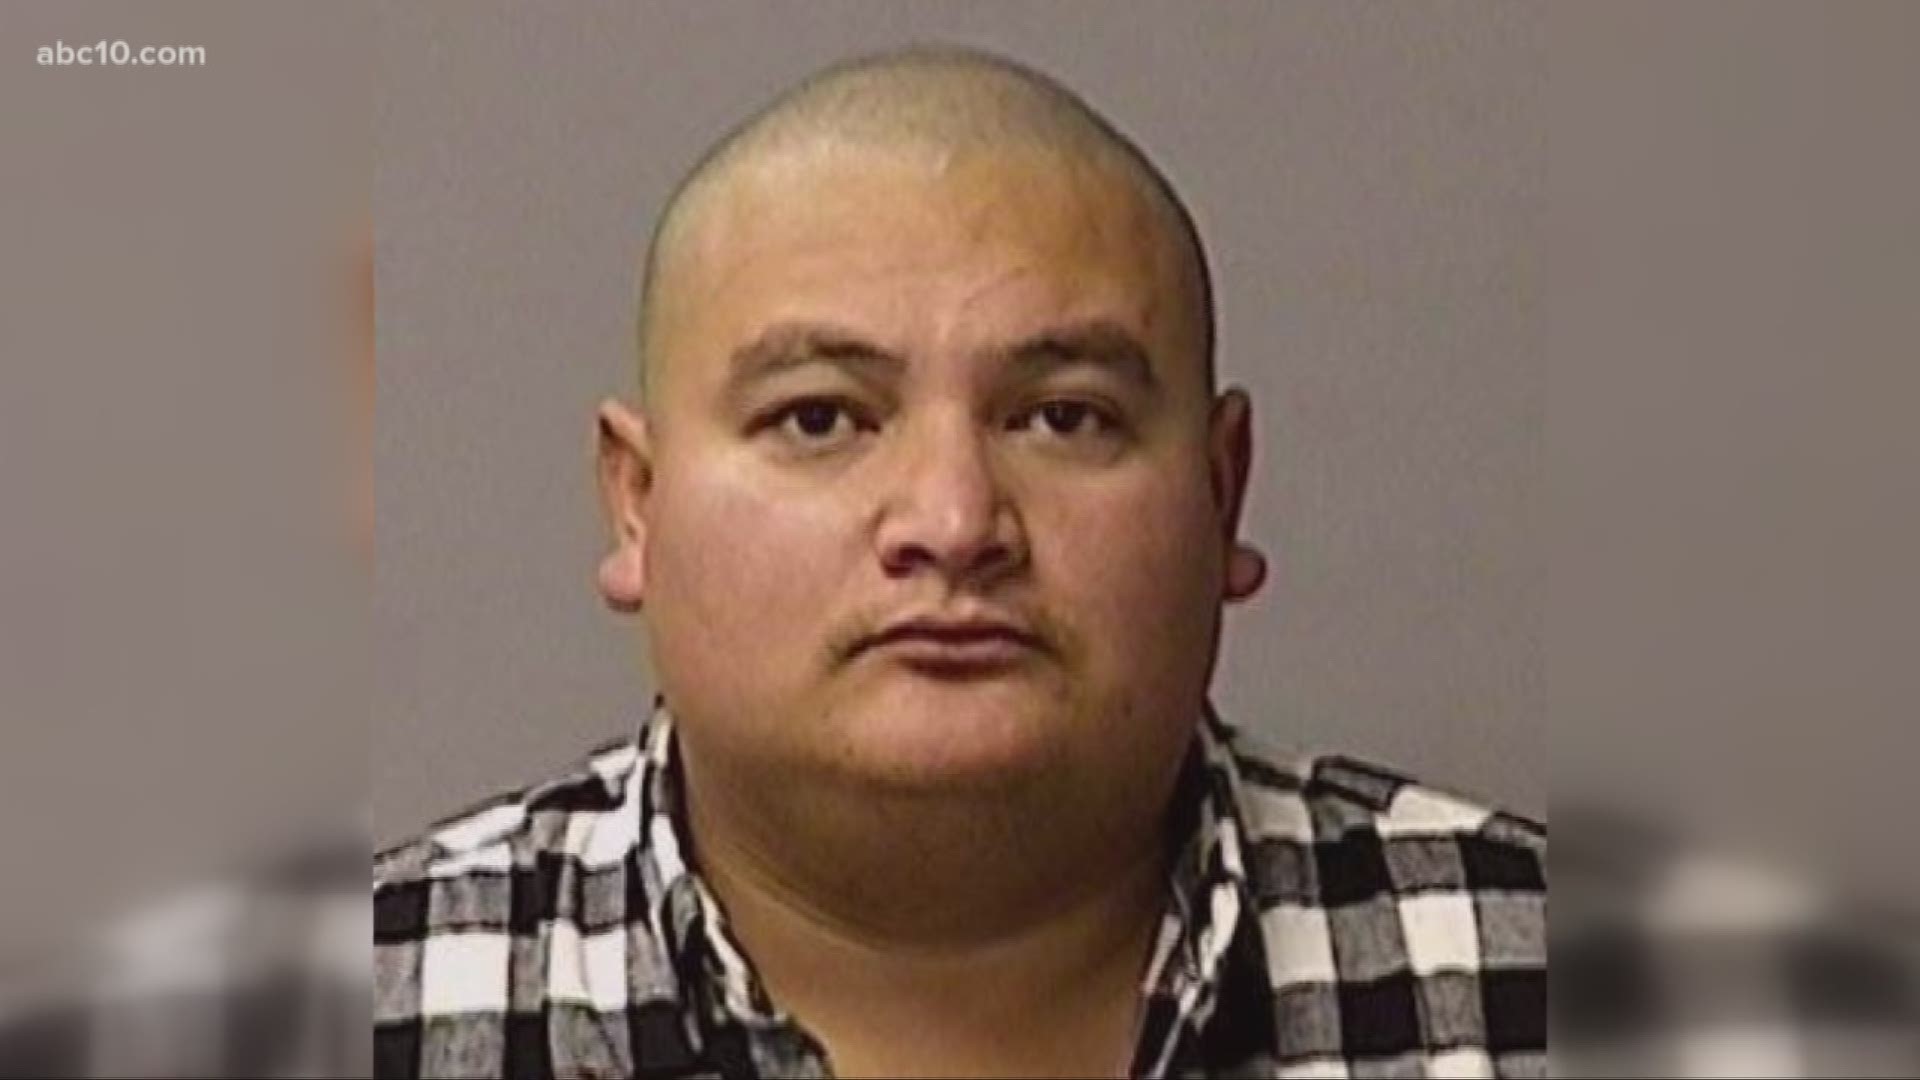 Investigators say 33-year-old Gustavo Arriaga shot and killed Newman Police Cpl. Ronil Singh during a traffic stop the day after Christmas. Arriaga was eventually taken into custody after a three-day manhunt and he appeared in court a week after the shooting, but his public defender questioned his mental stability.